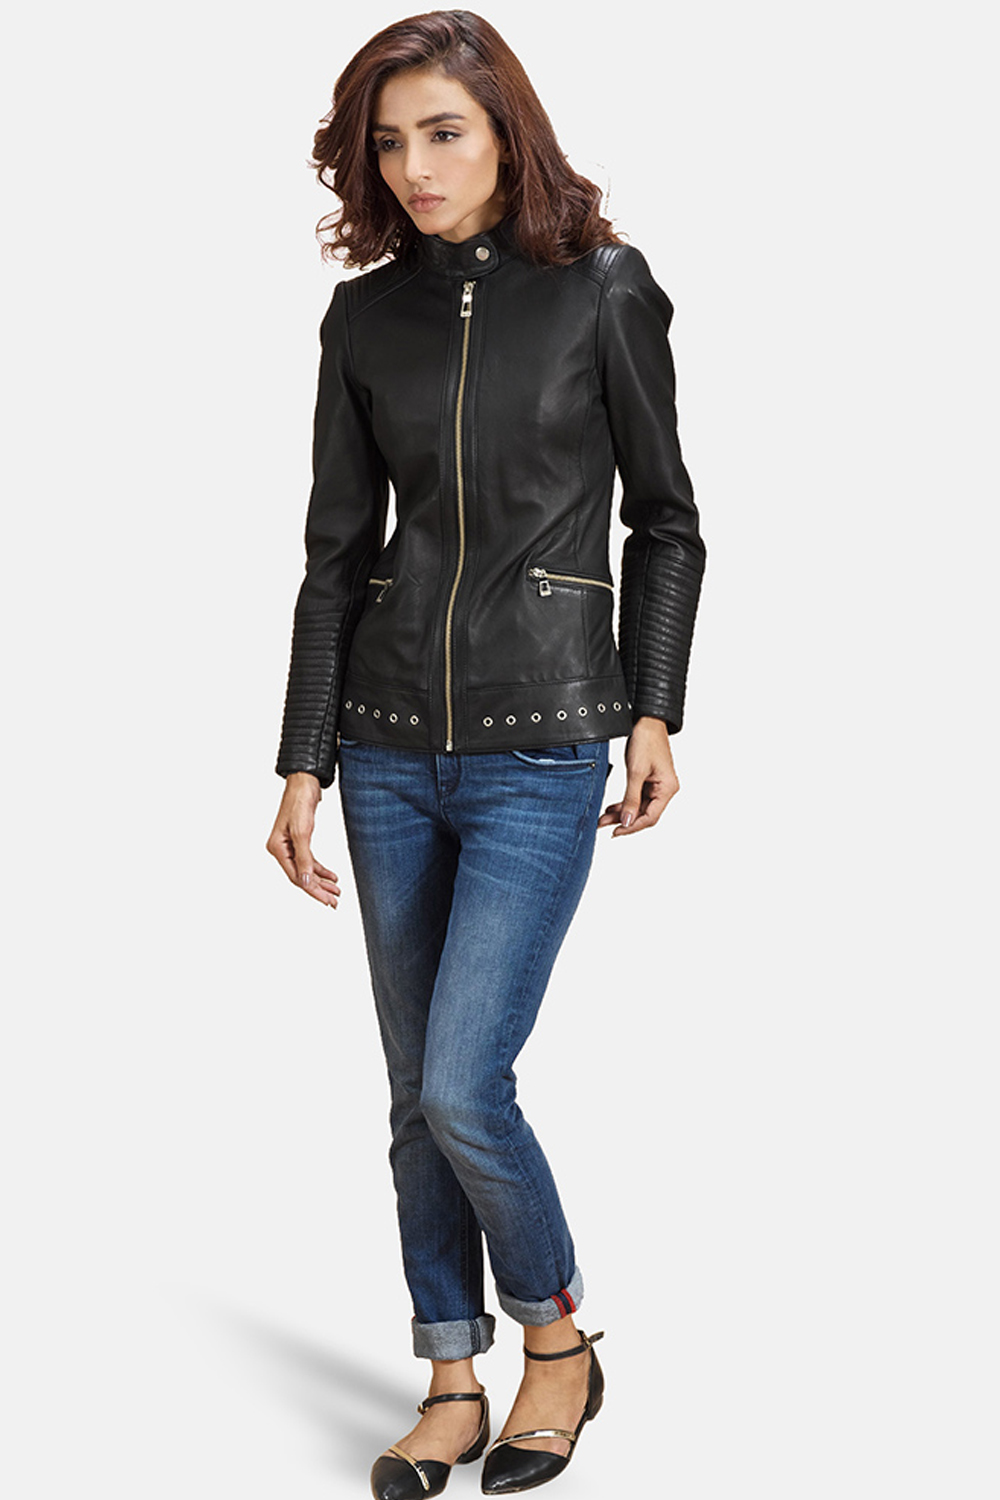 a lookbook snapshot of a woman wearing leather jacket